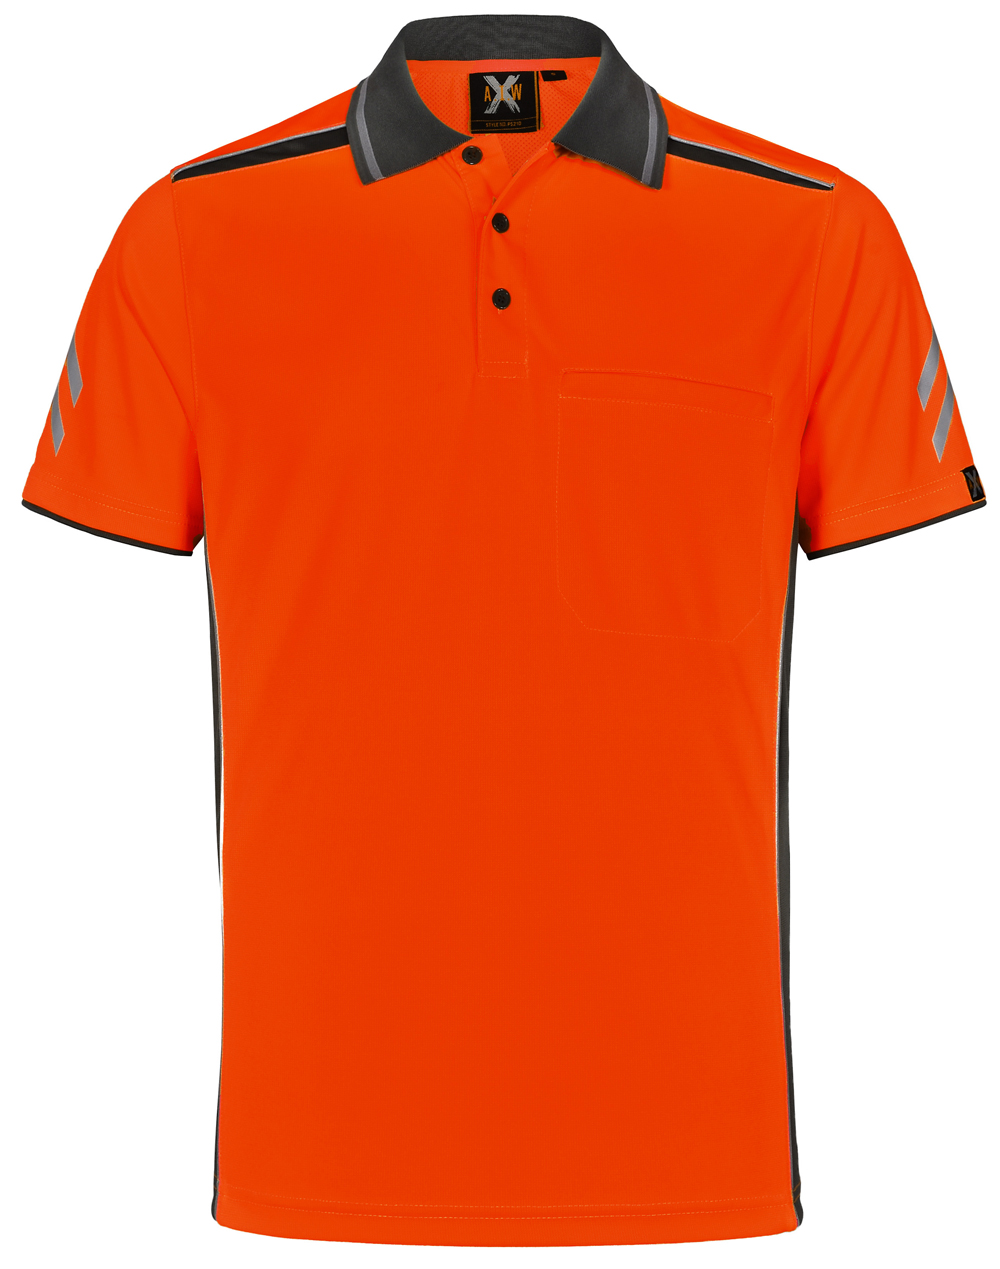 PS210 UNISEX COOLDRY® VENTED POLO